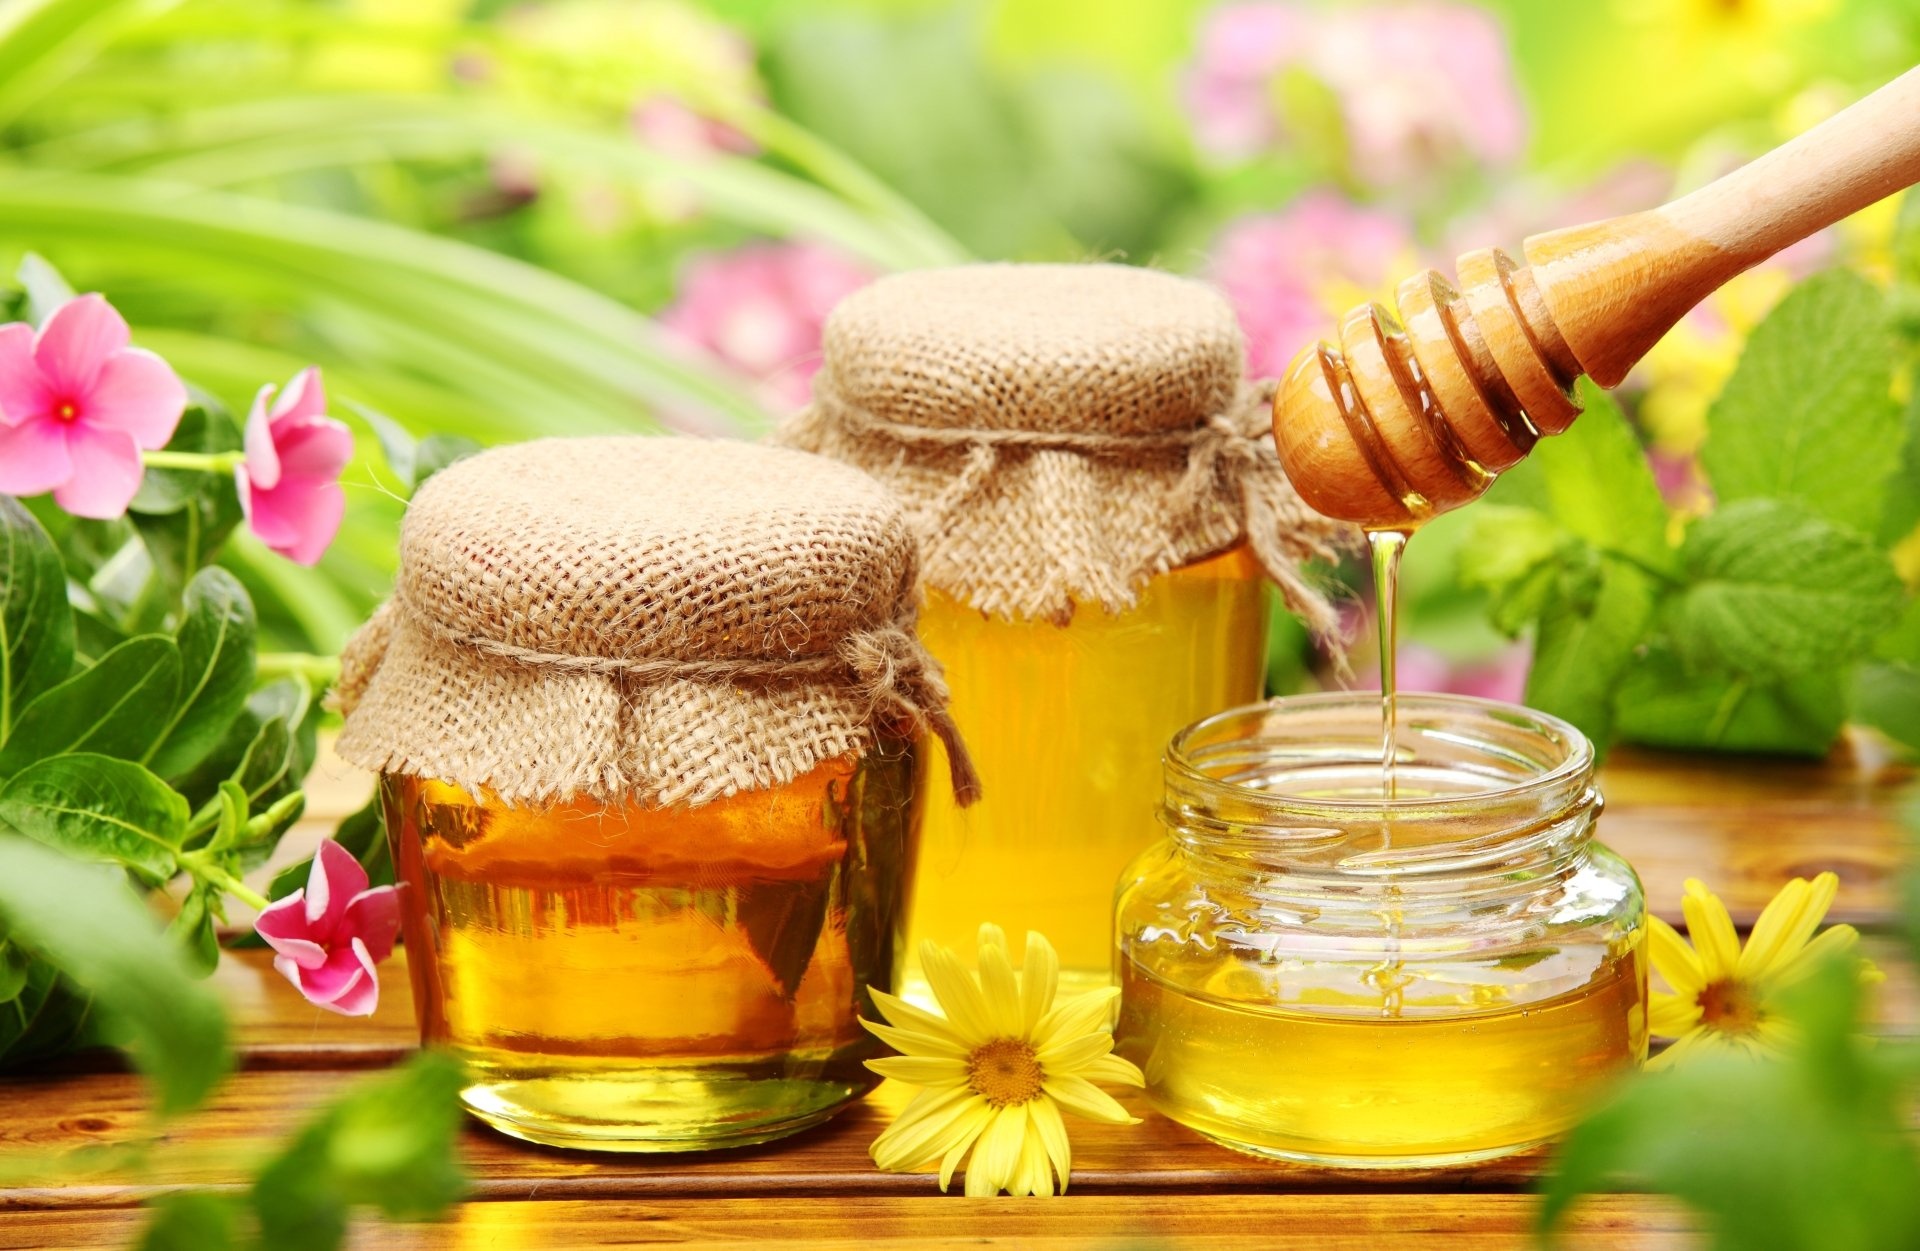 Honey: Used as an anti-inflammatory, antioxidant, and antibacterial agent. 1920x1260 HD Wallpaper.